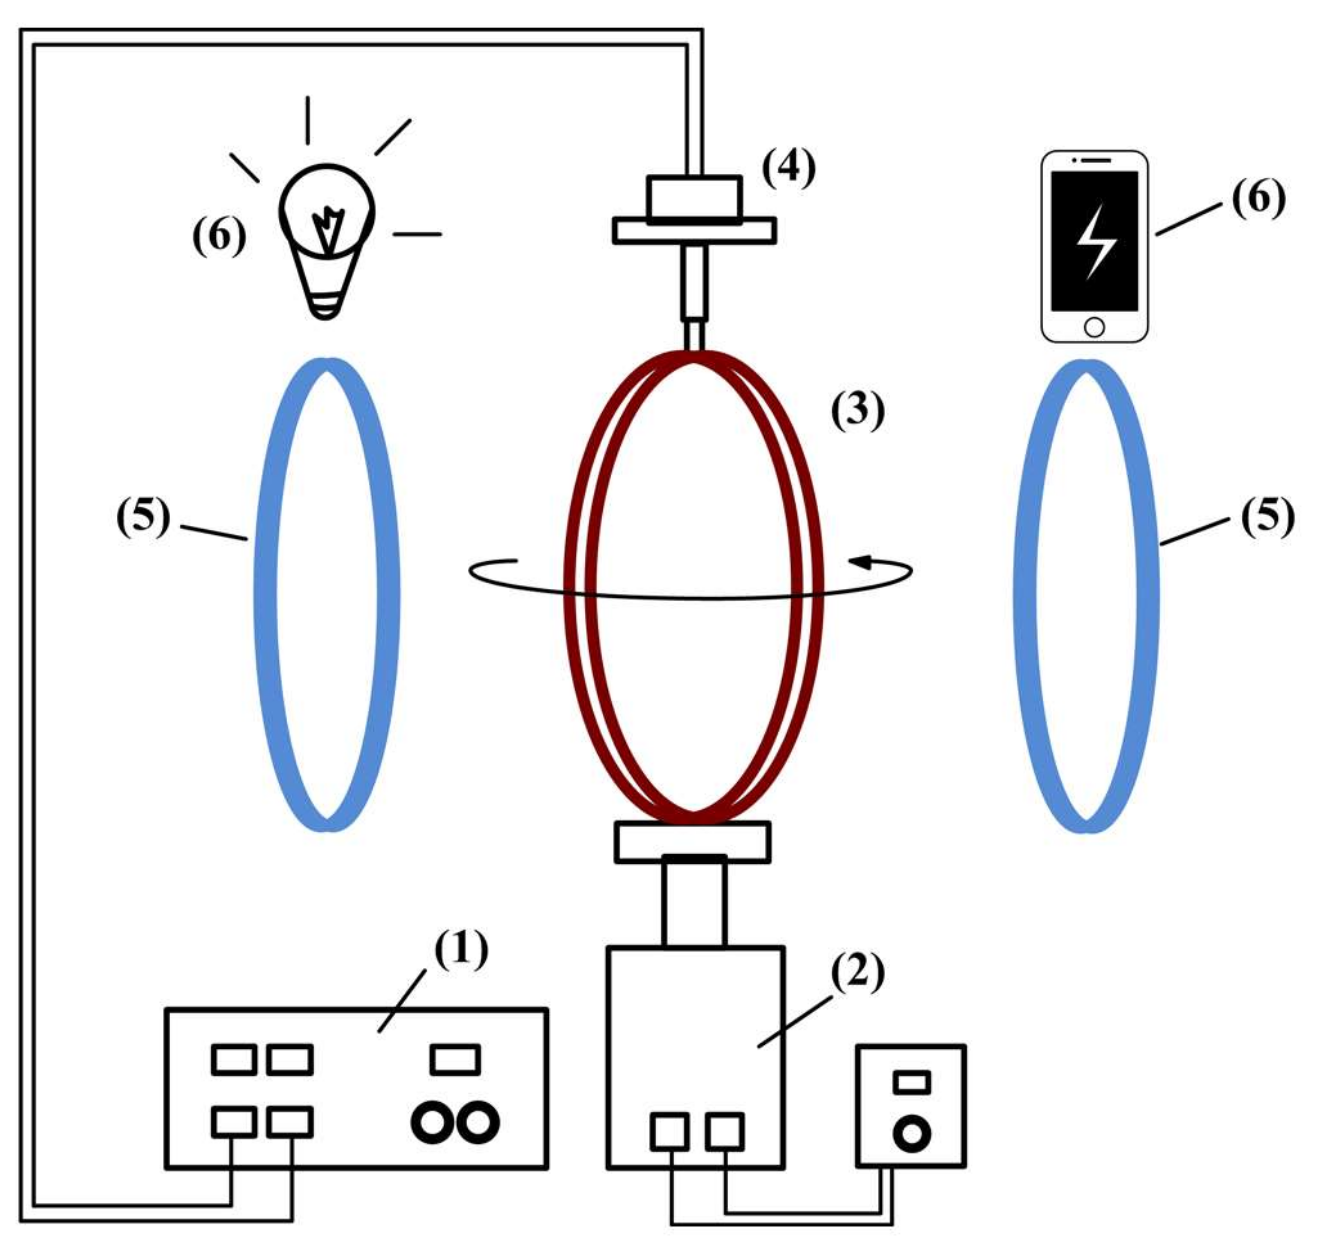 Energies Free Full Text Omnidirectional Wireless Power Transfer System Based On Rotary Transmitting Coil For Household Appliances Html